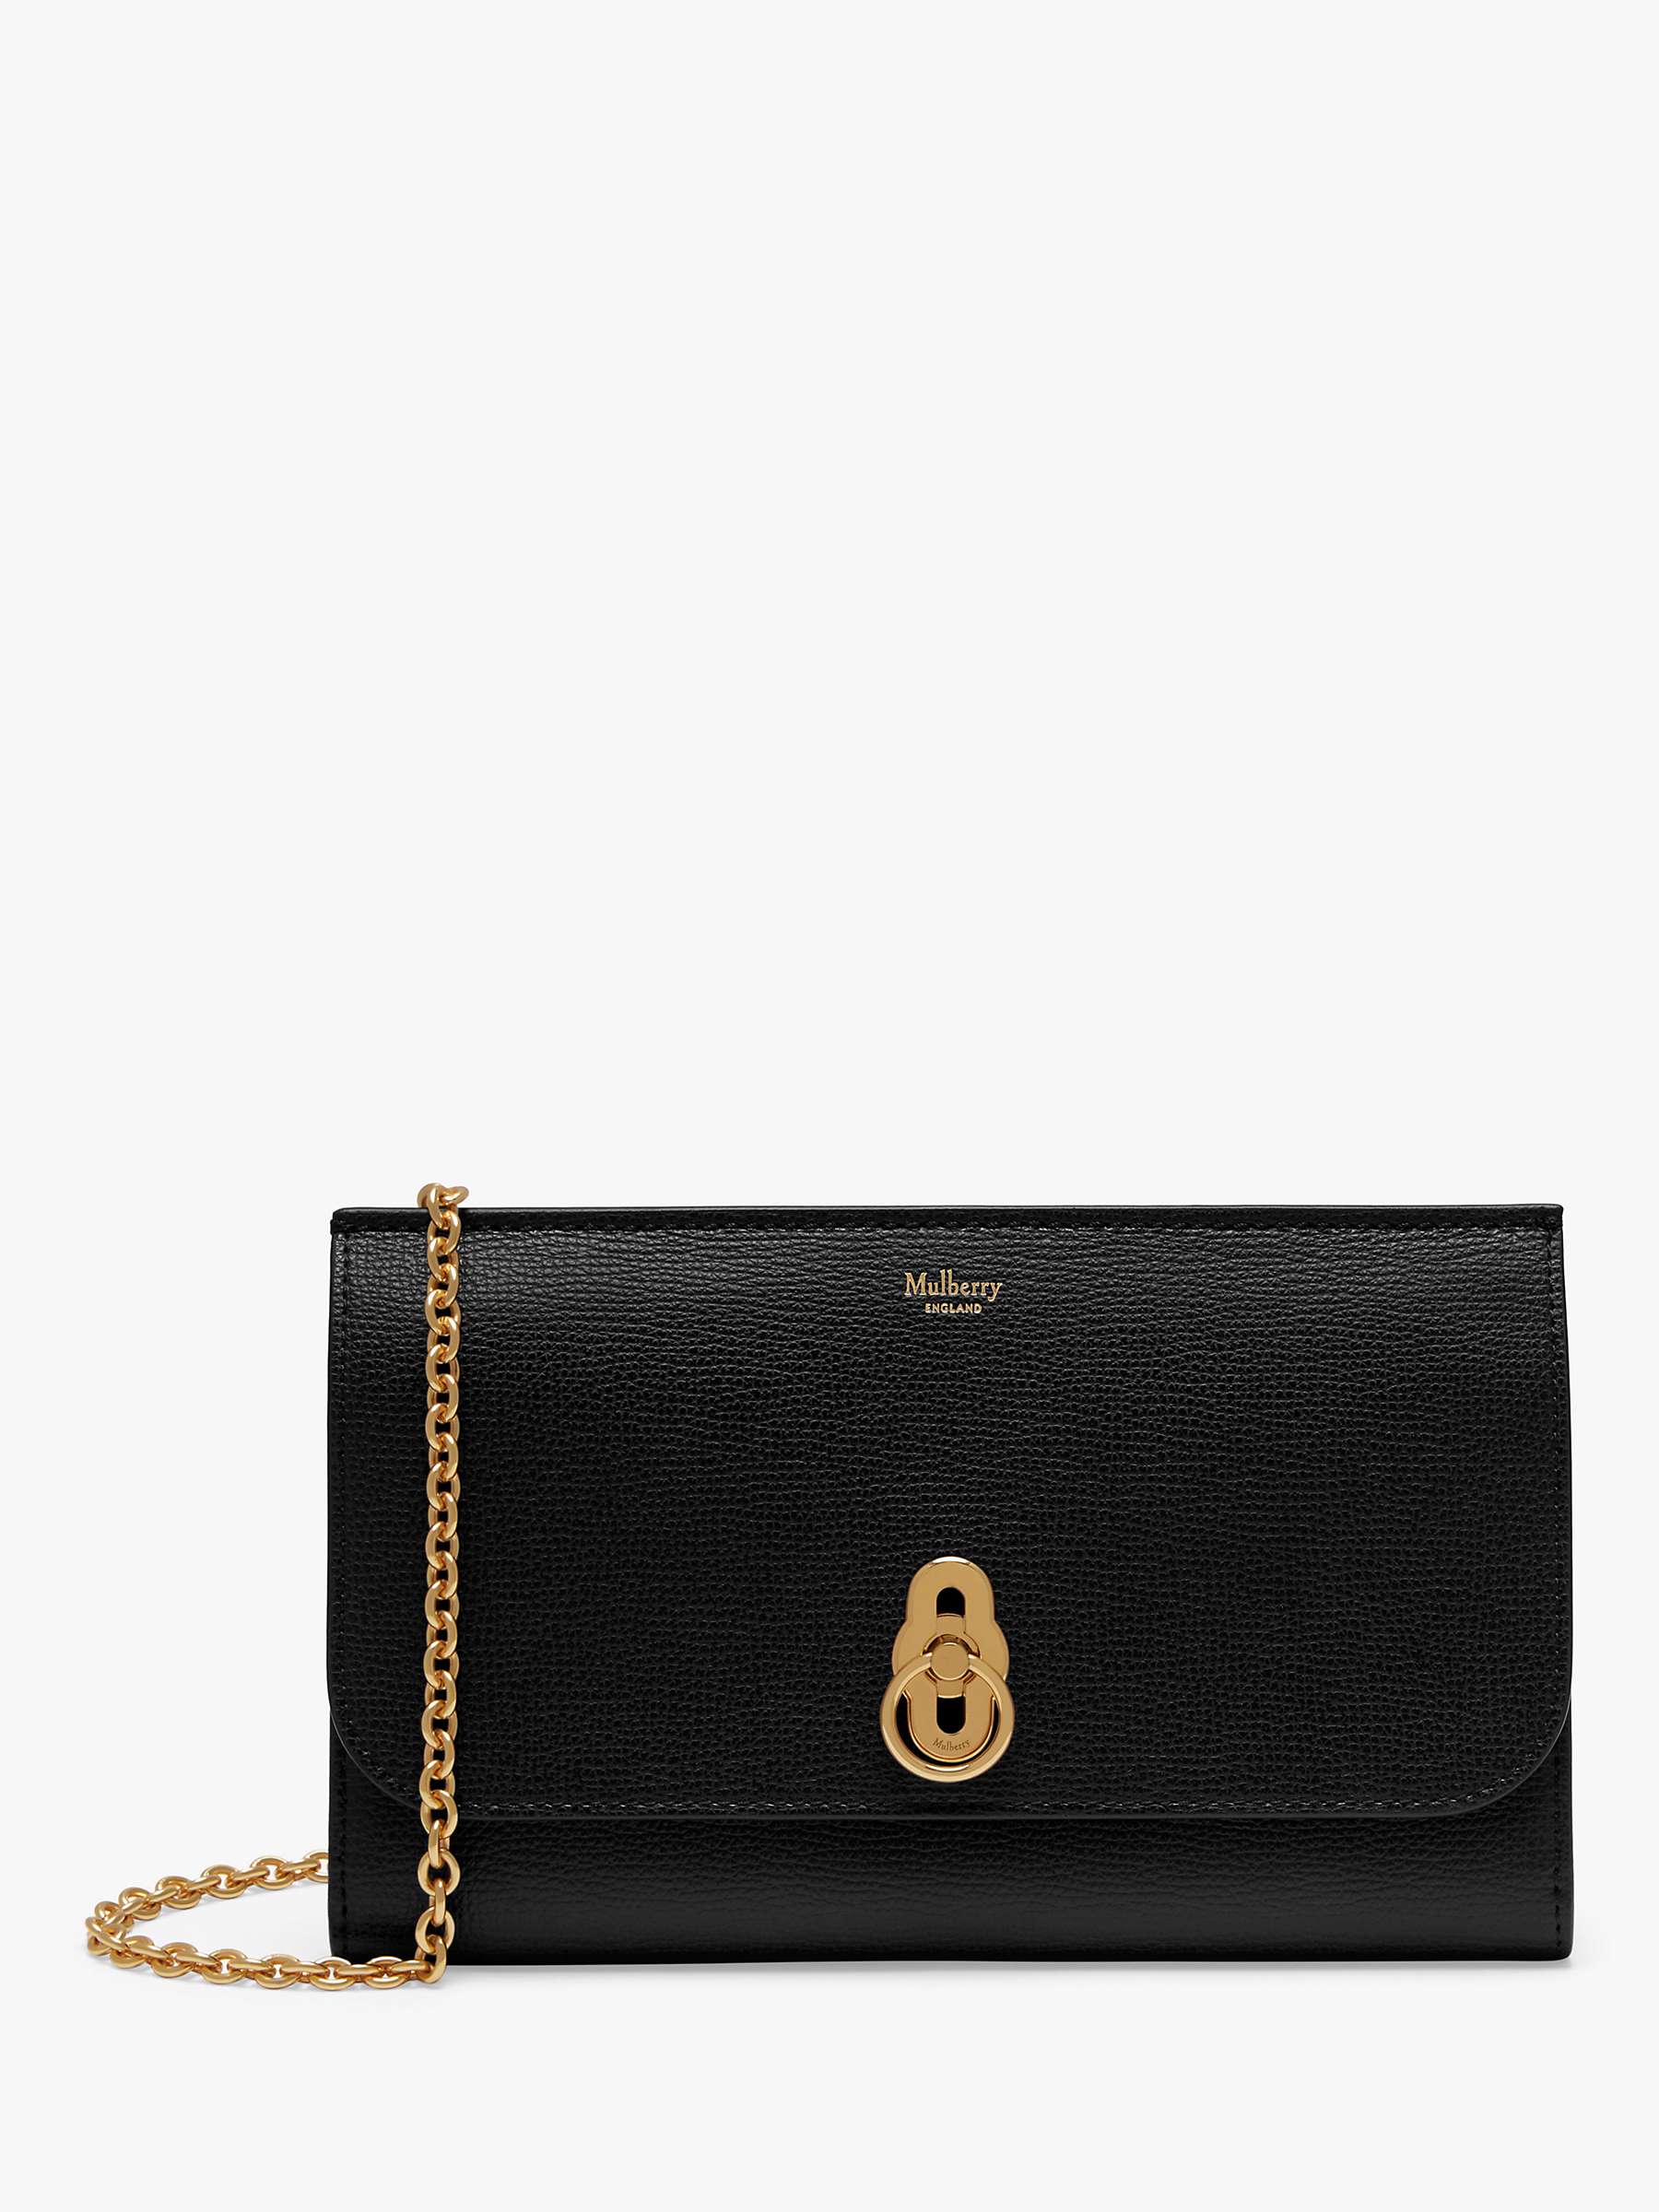 Buy Mulberry Amberley Small Classic Grain Leather Clutch Bag Online at johnlewis.com